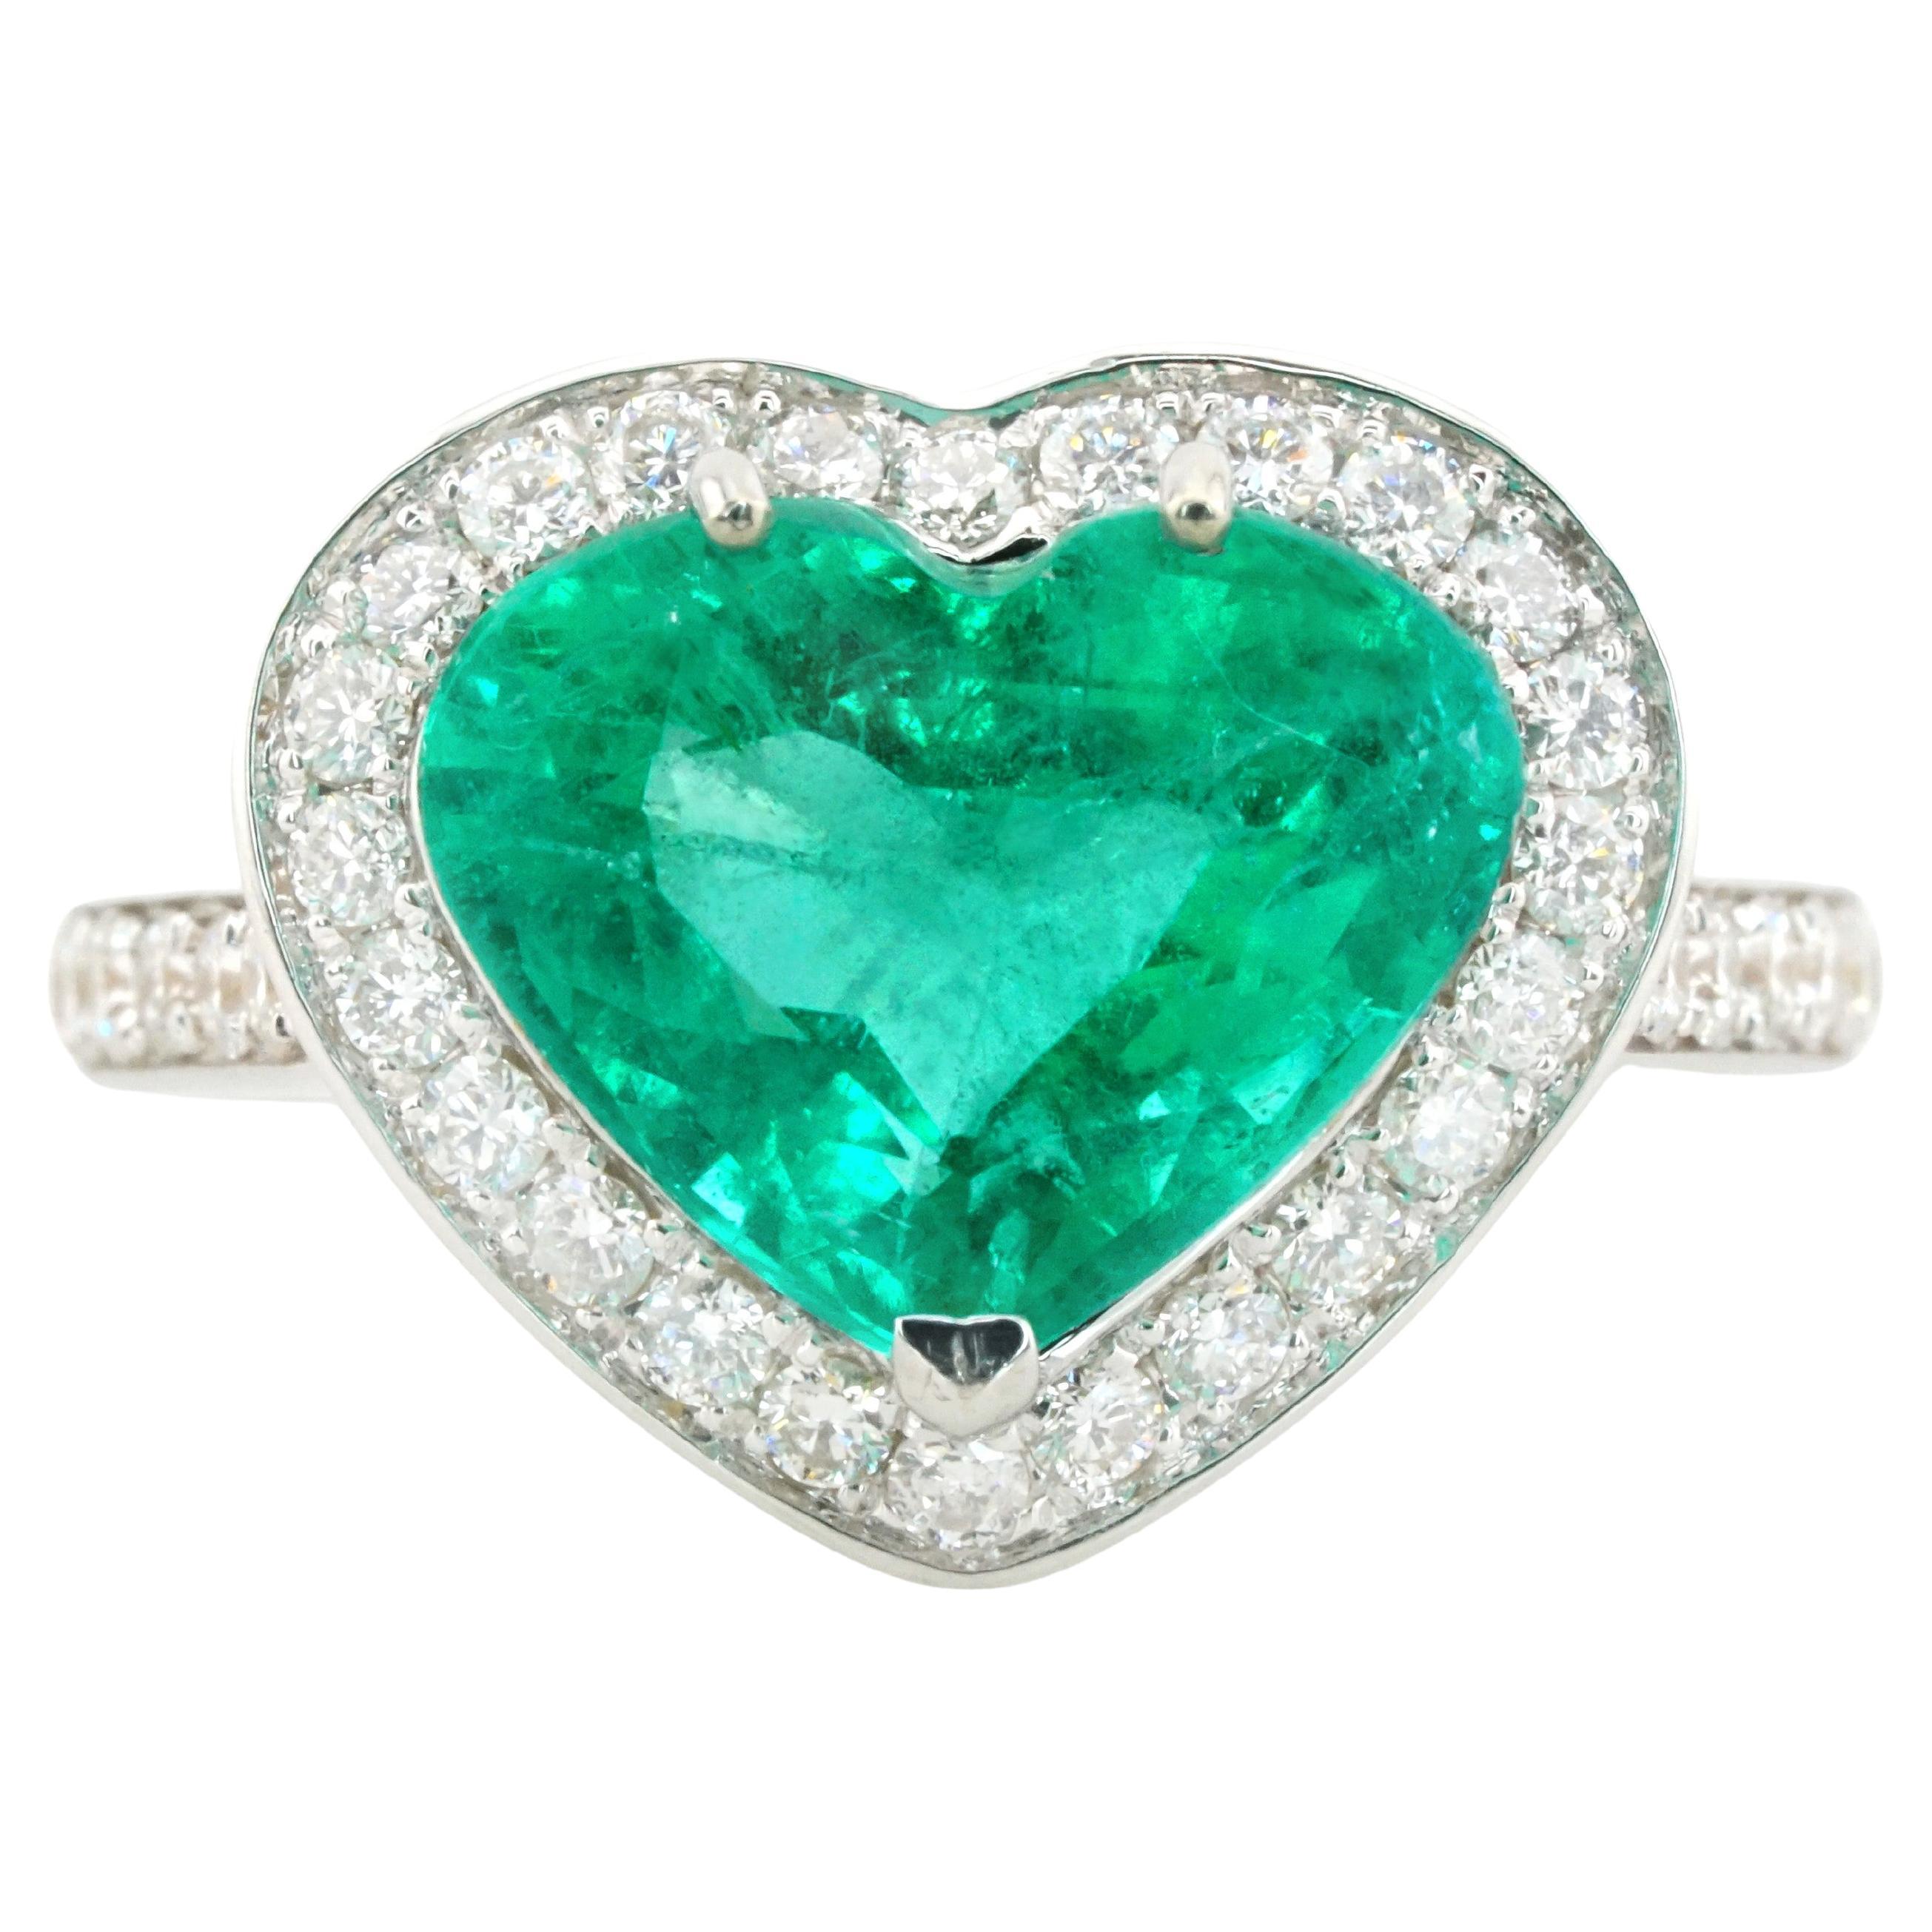 IGI Certified 3.72 Carat Heart Minor Oil Emerald Diamond Made In Italy Ring  For Sale